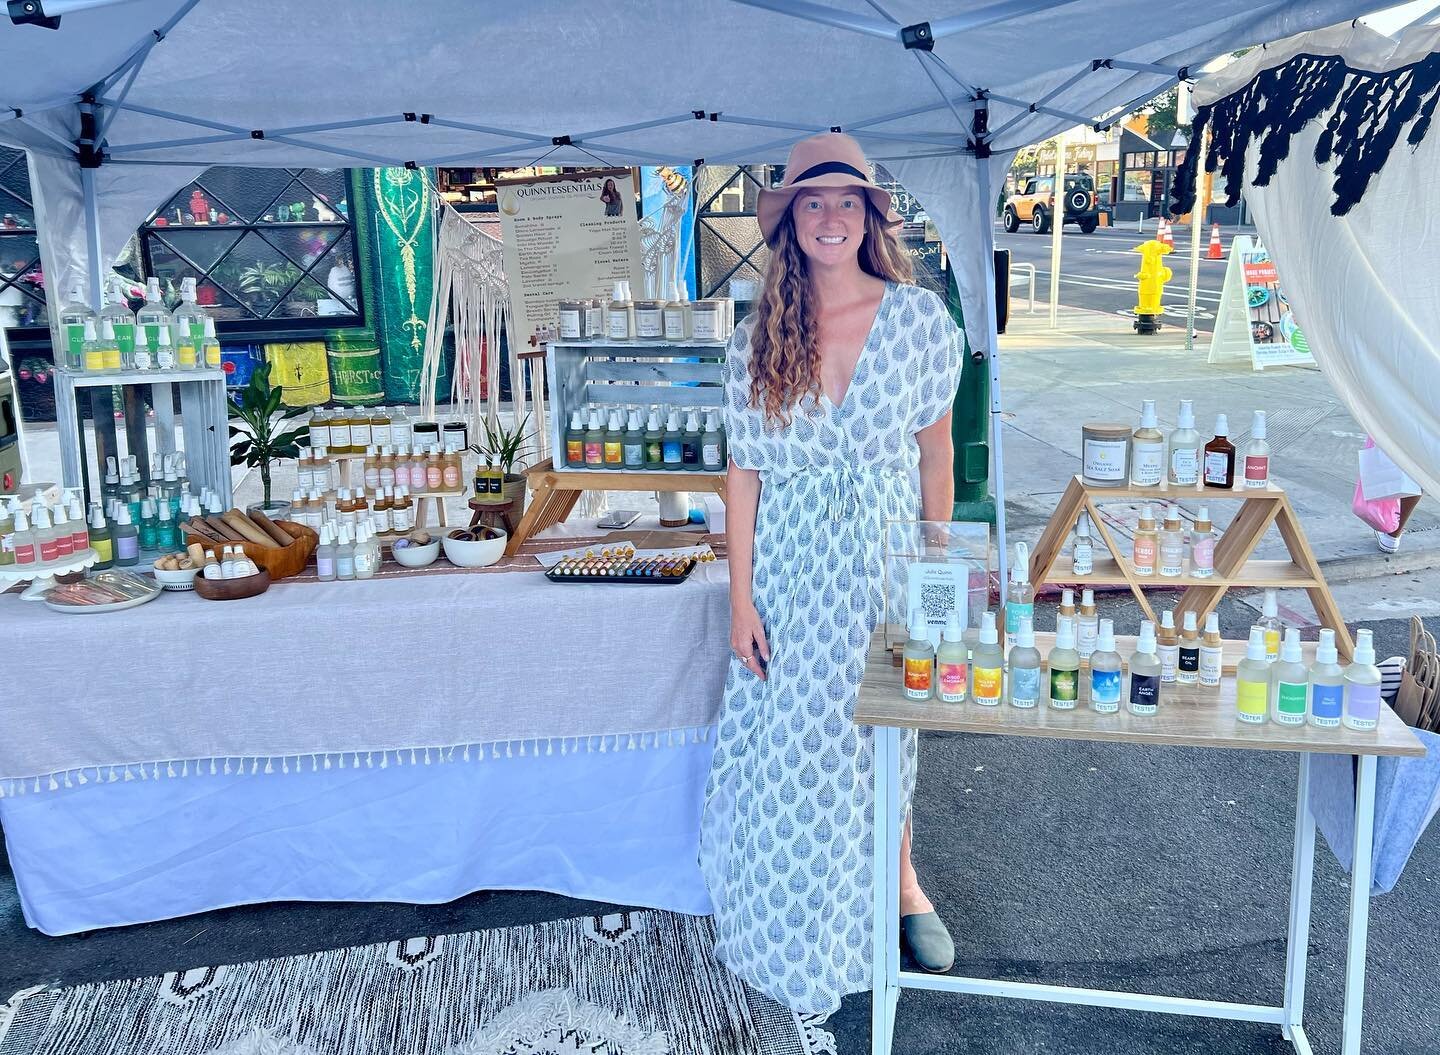 We&rsquo;re popping up at the North Park Farmers Market every Thursday! 
Come out between 3-7:30pm and smell some organic aromatherapy! 
.

.
#northparkfarmersmarket #sandiegomade #shoplocal #organicessentialoils #quinntessentials #quinntessentialspr